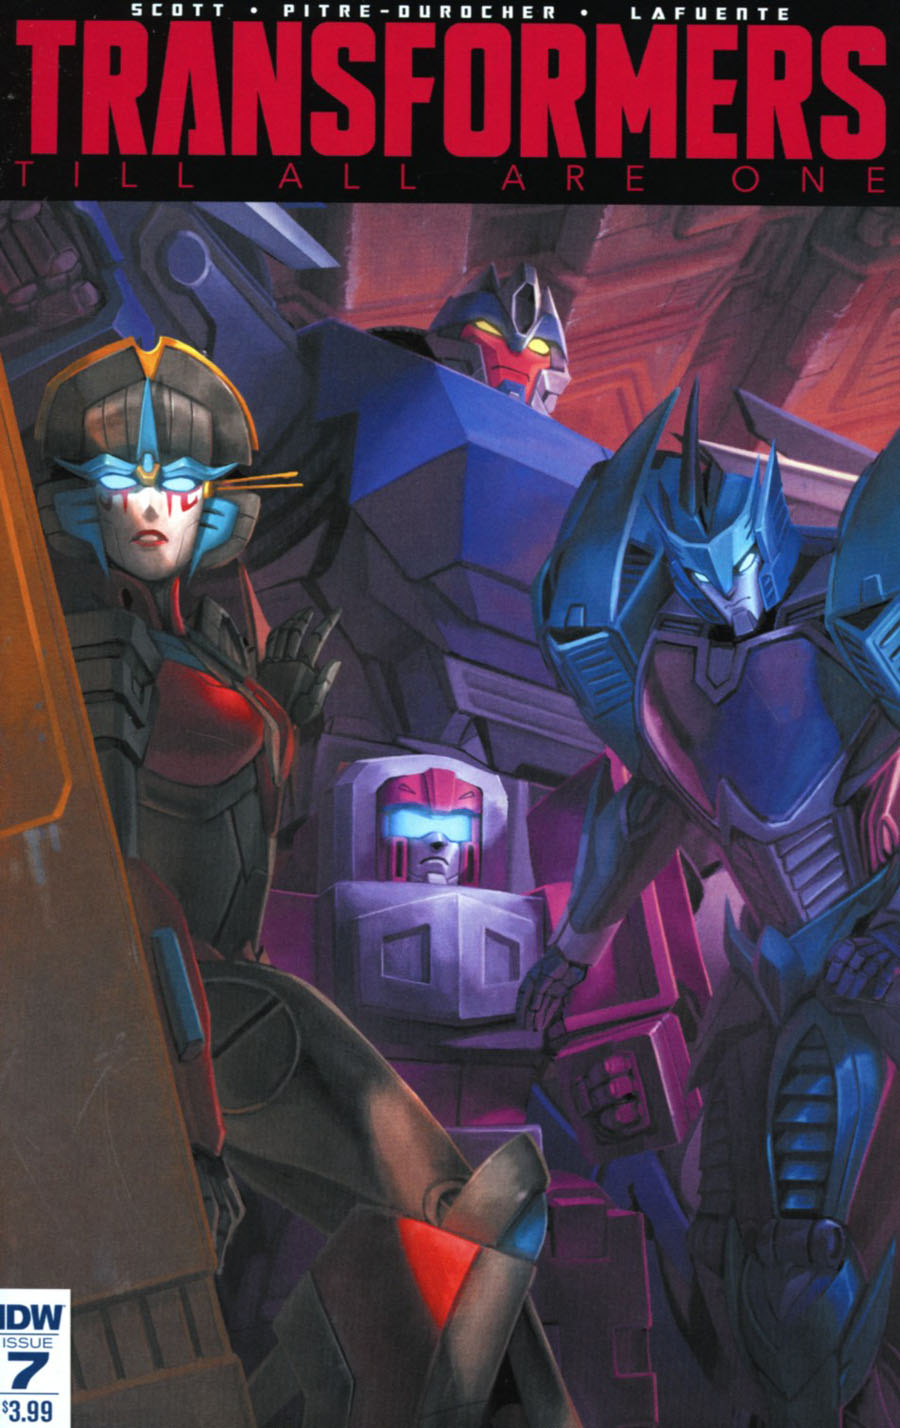 Transformers Till All Are One #7 Cover A Regular Sara Pitre-Durocher Cover